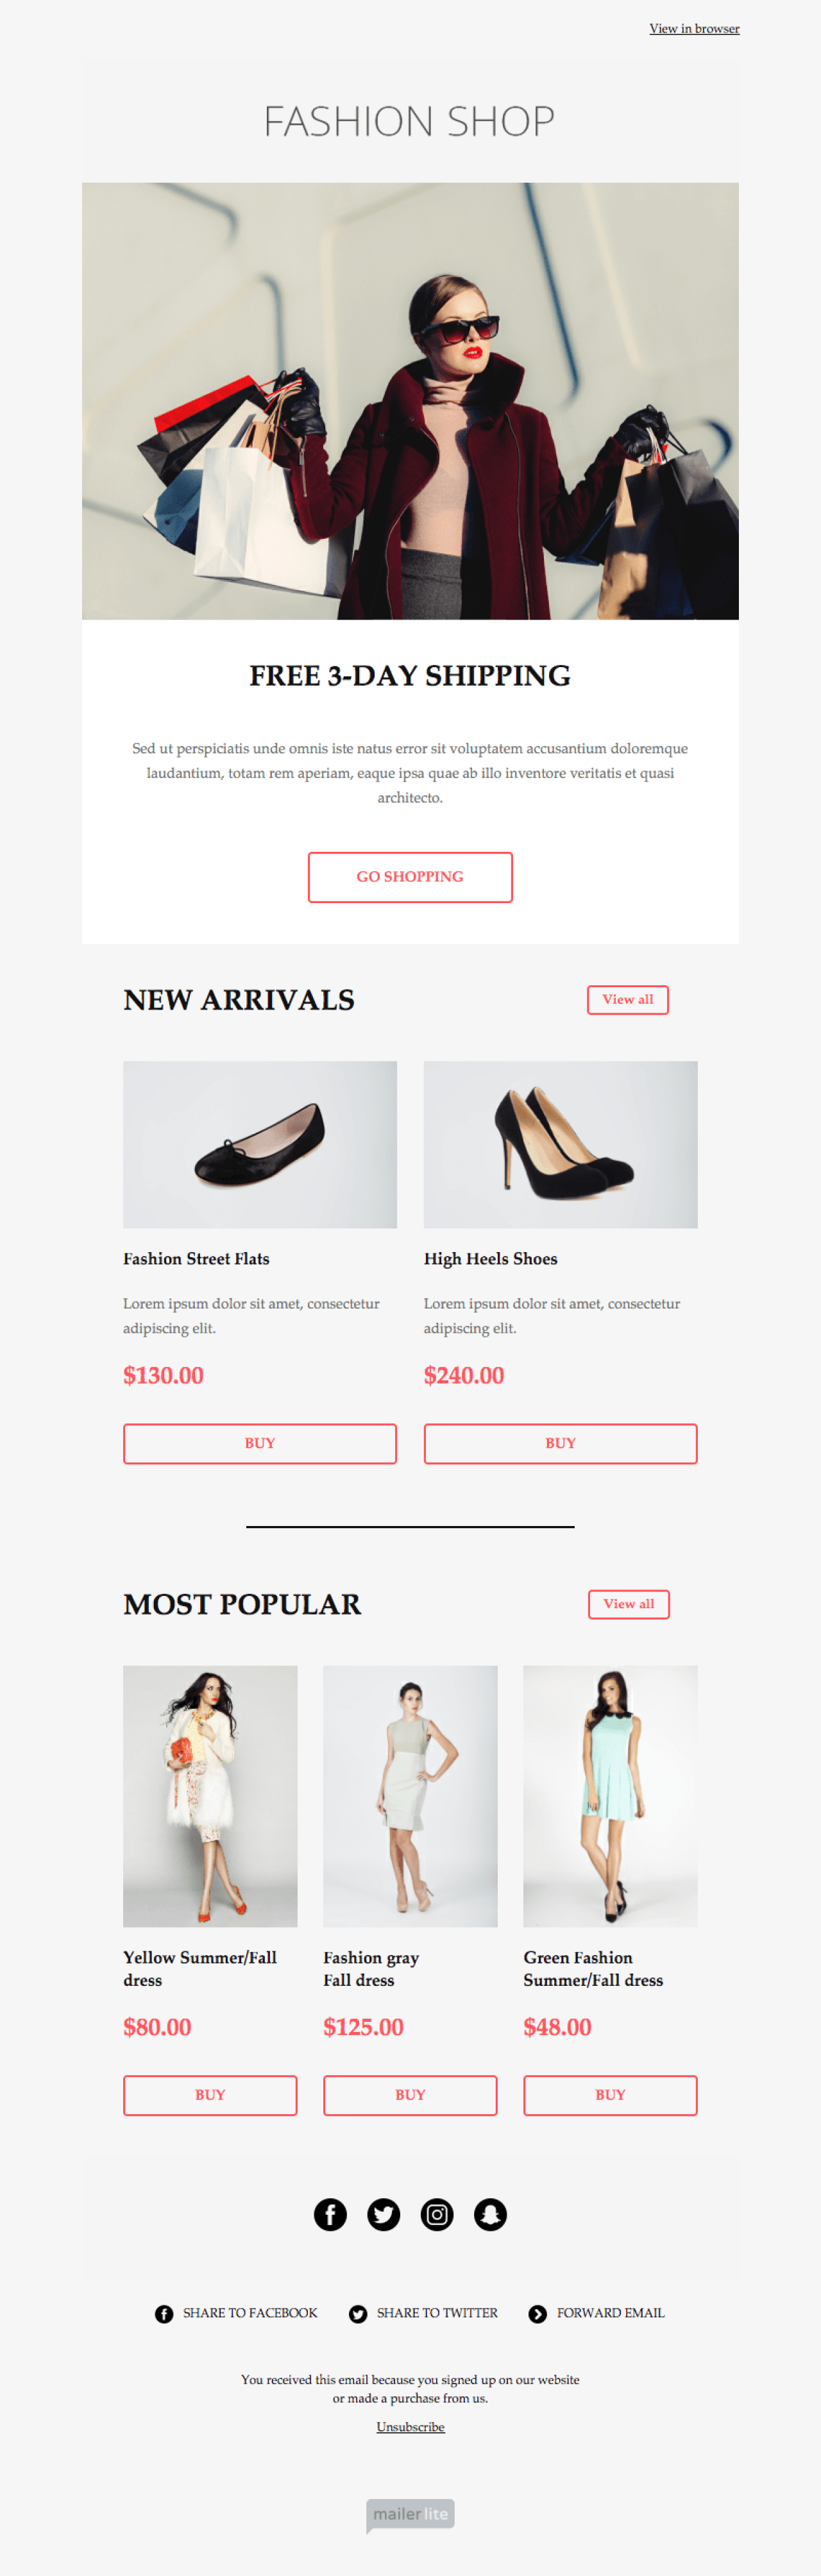 Fashion Featured Deals example - Made with MailerLite